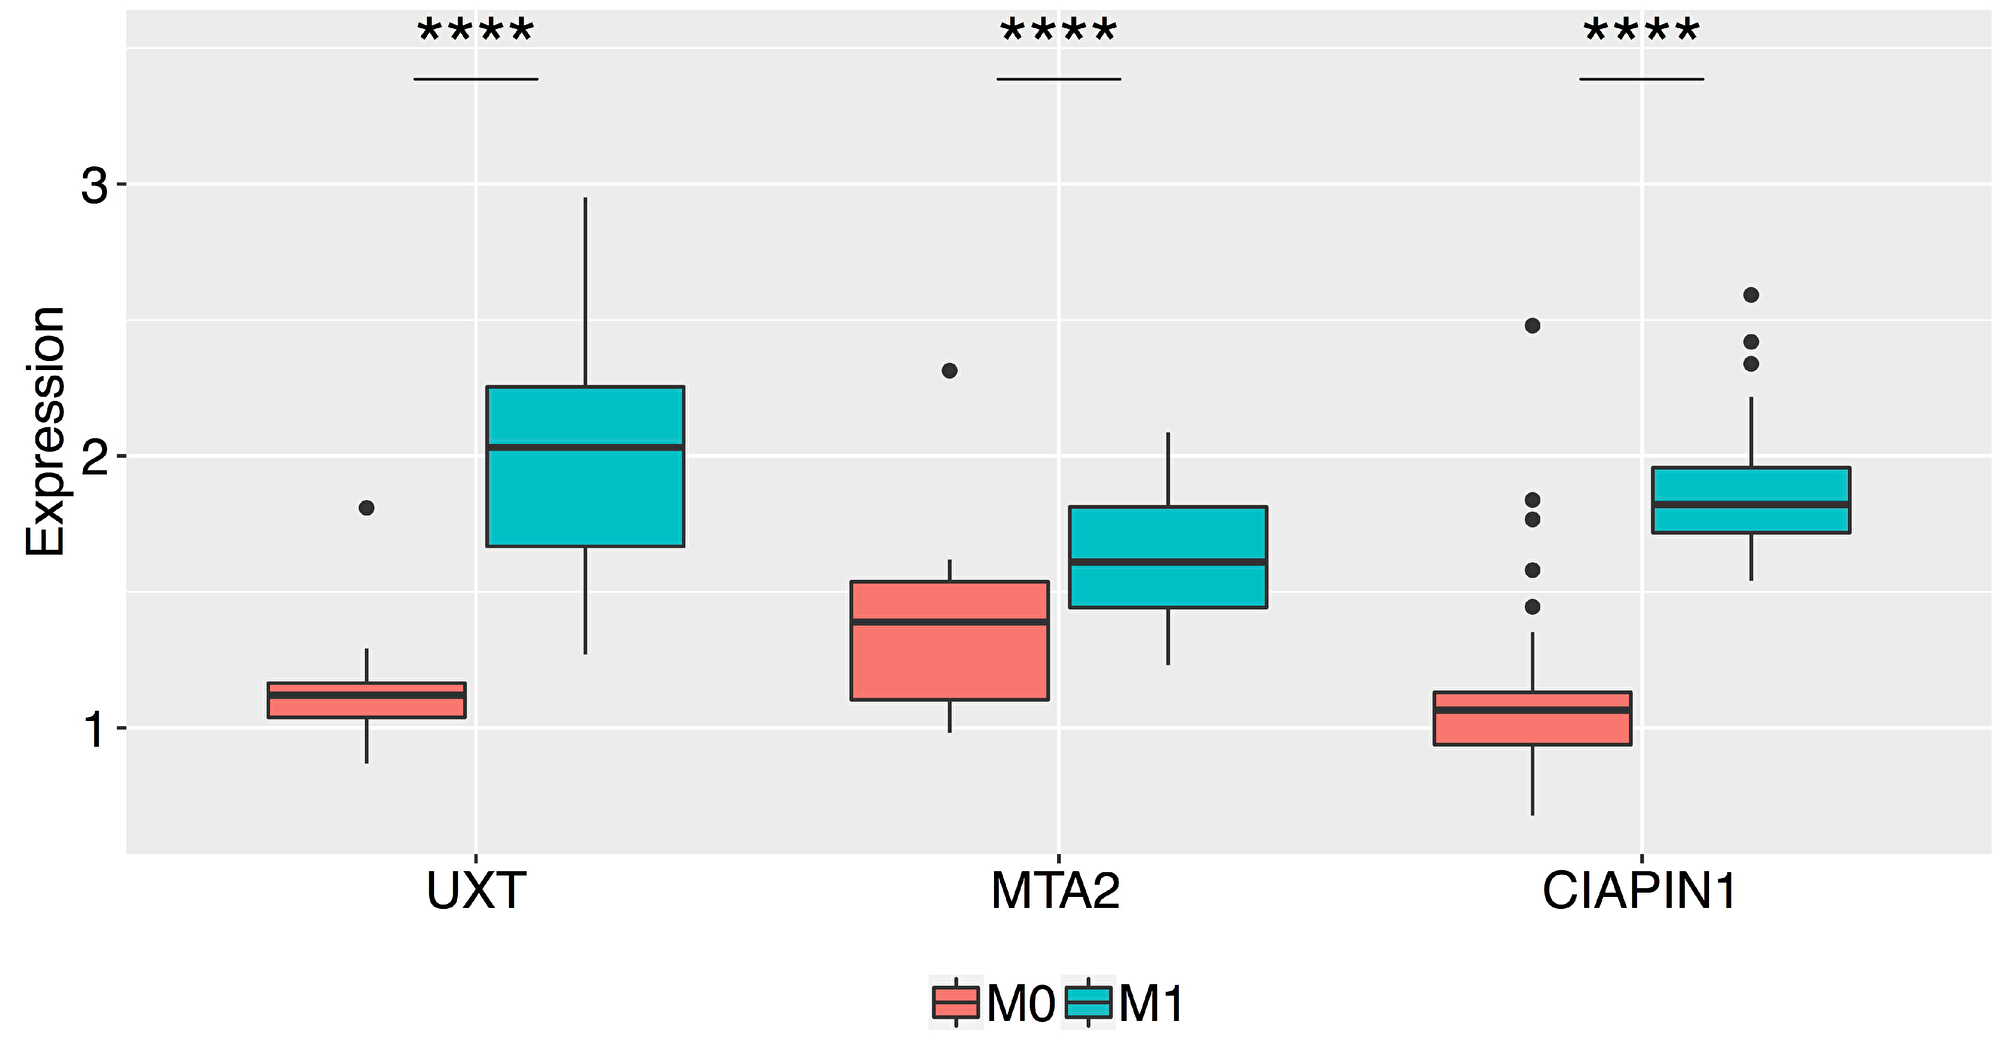 Box plots of the normalized relative expression of the UXT, MTA2, and CIAPIN1 proteins in the gastric tumor tissue of patients without metastasis (M0) and with metastasis (M1) (****P &lt; 0.0001).